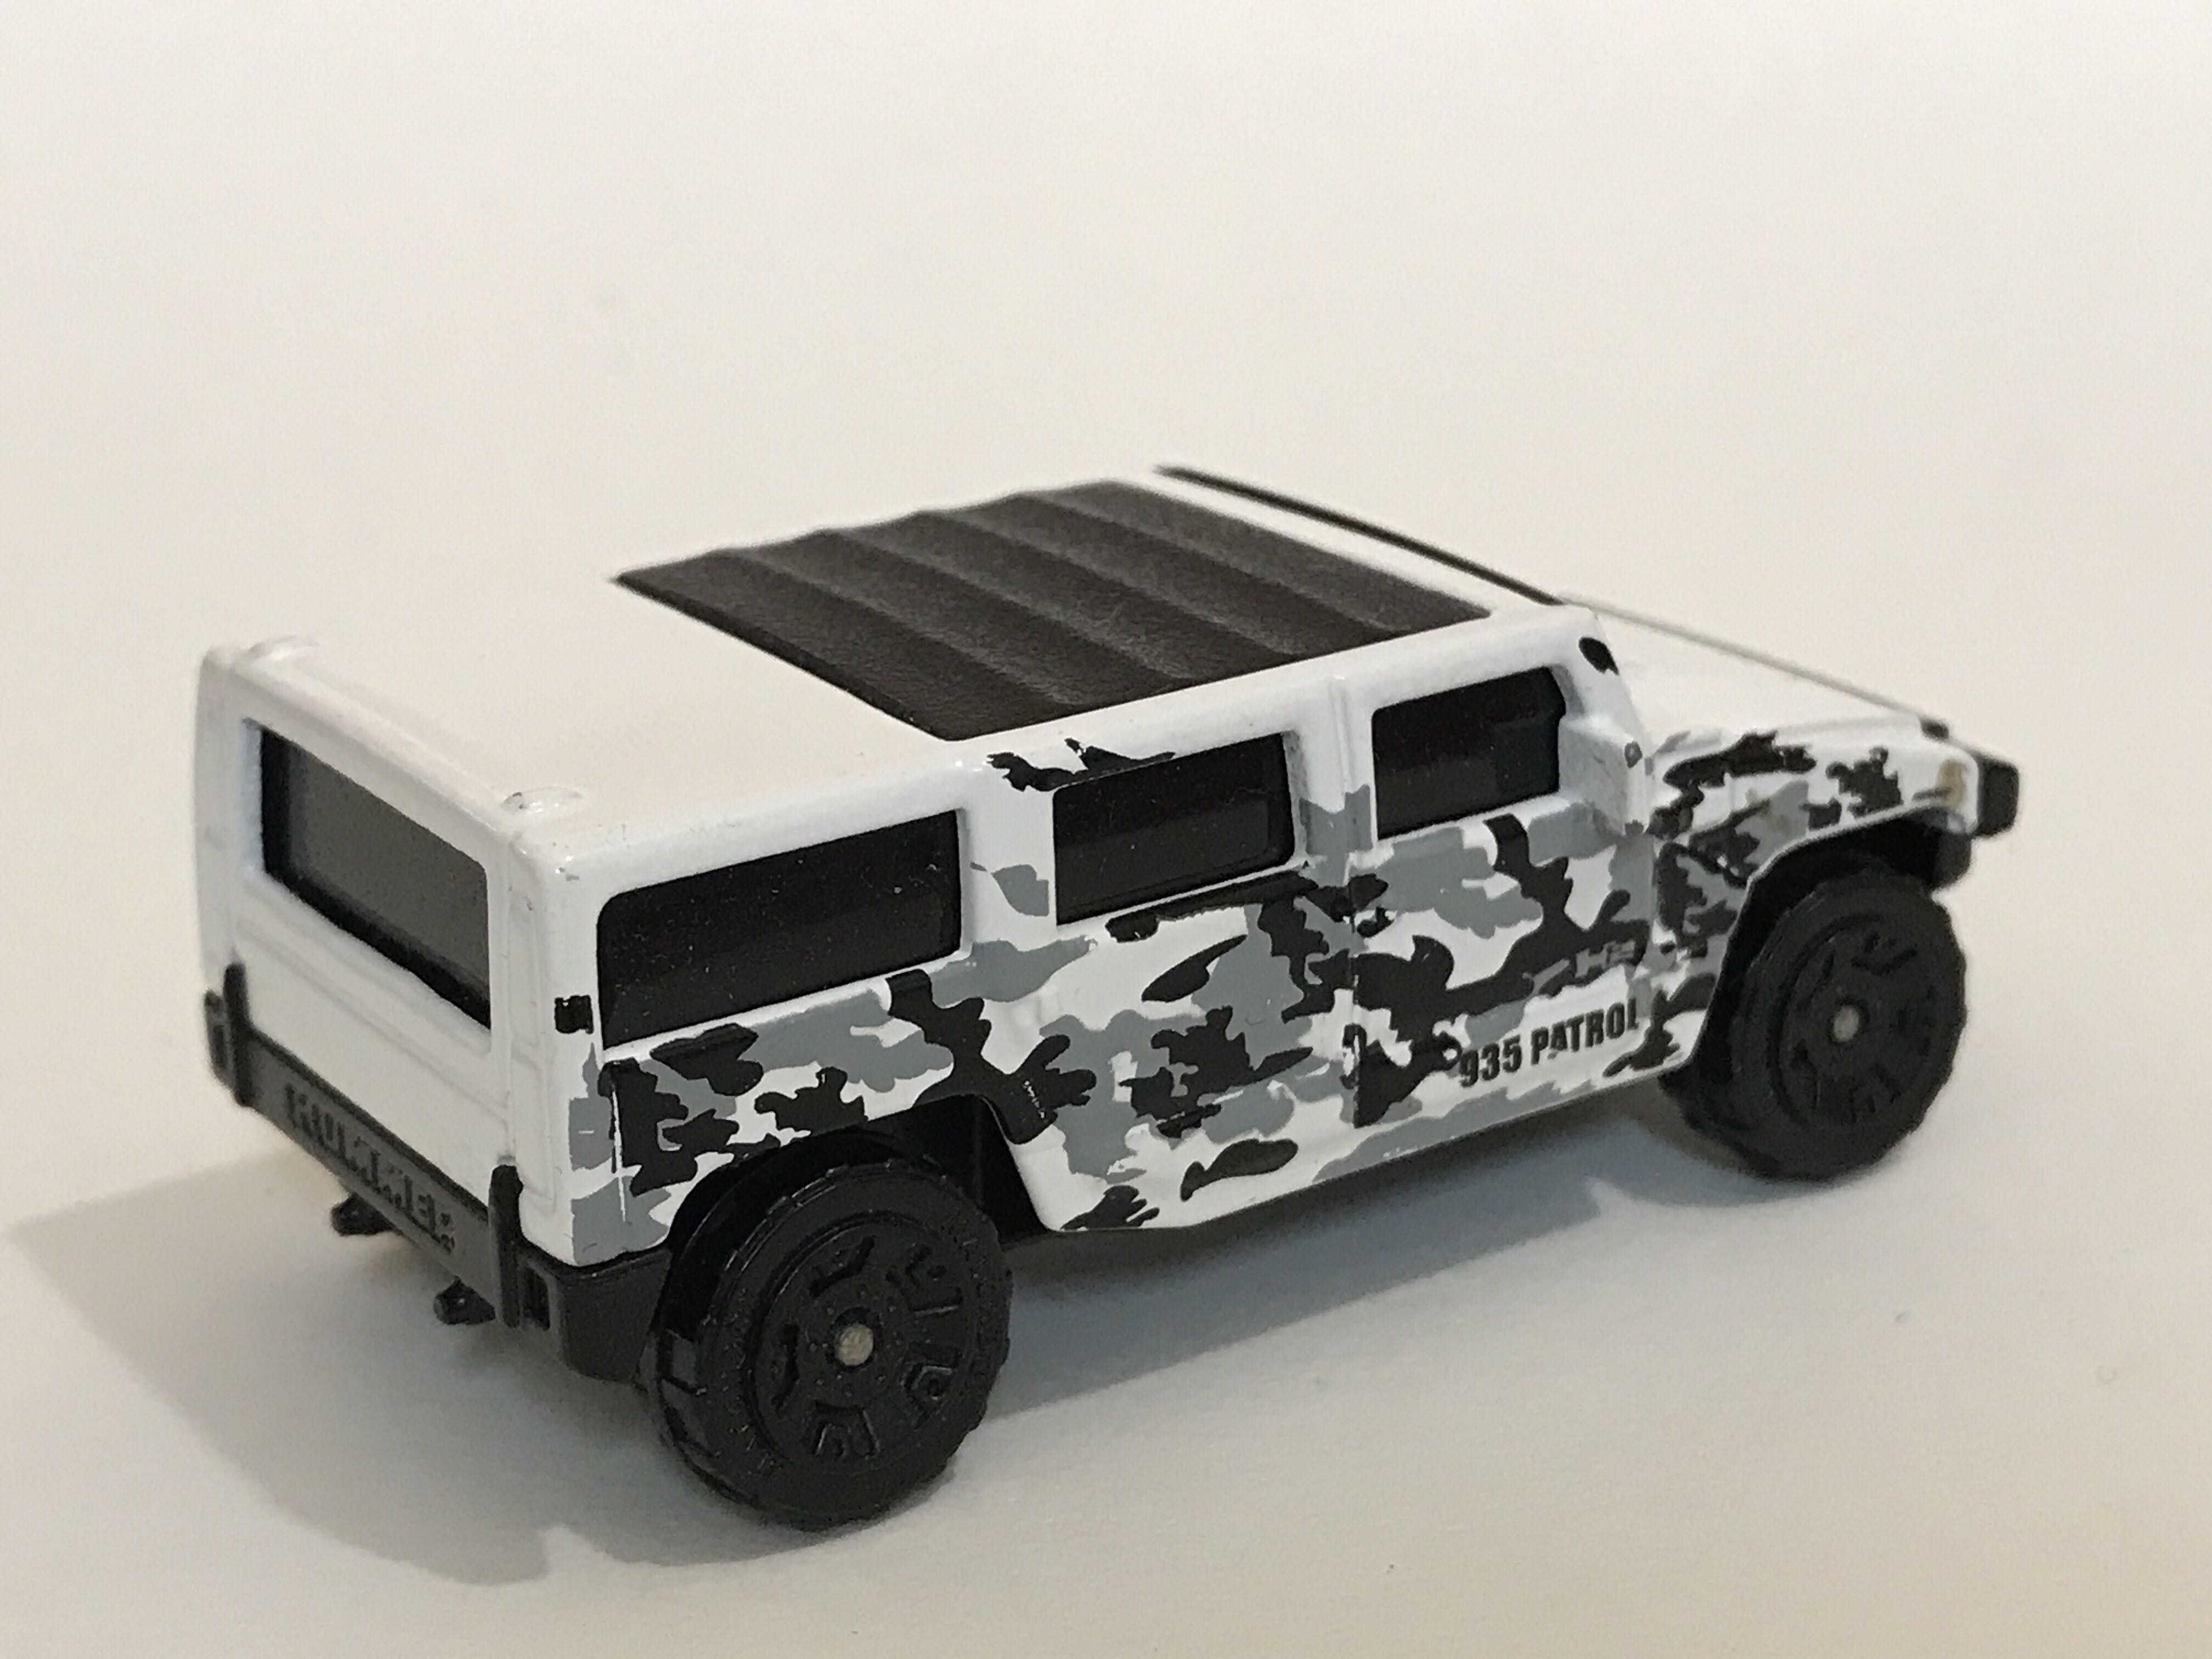 Hummer H2 SUV Concept - 2006 - MBX 1-75 toy car collectible - Main Image 2